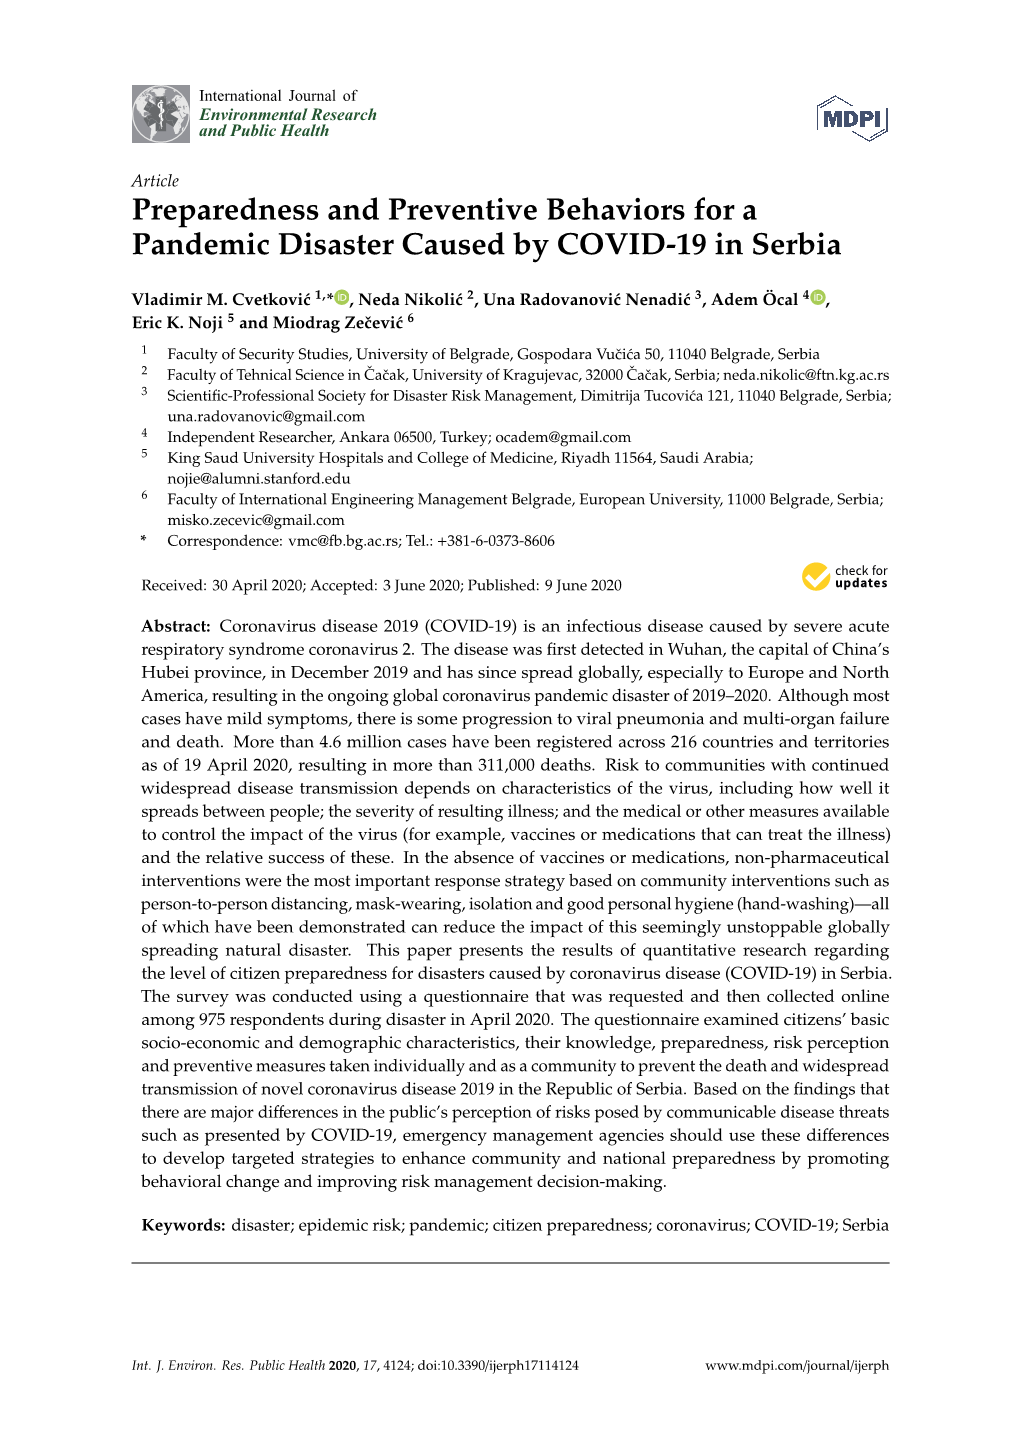 Preparedness and Preventive Behaviors for a Pandemic Disaster Caused by COVID-19 in Serbia